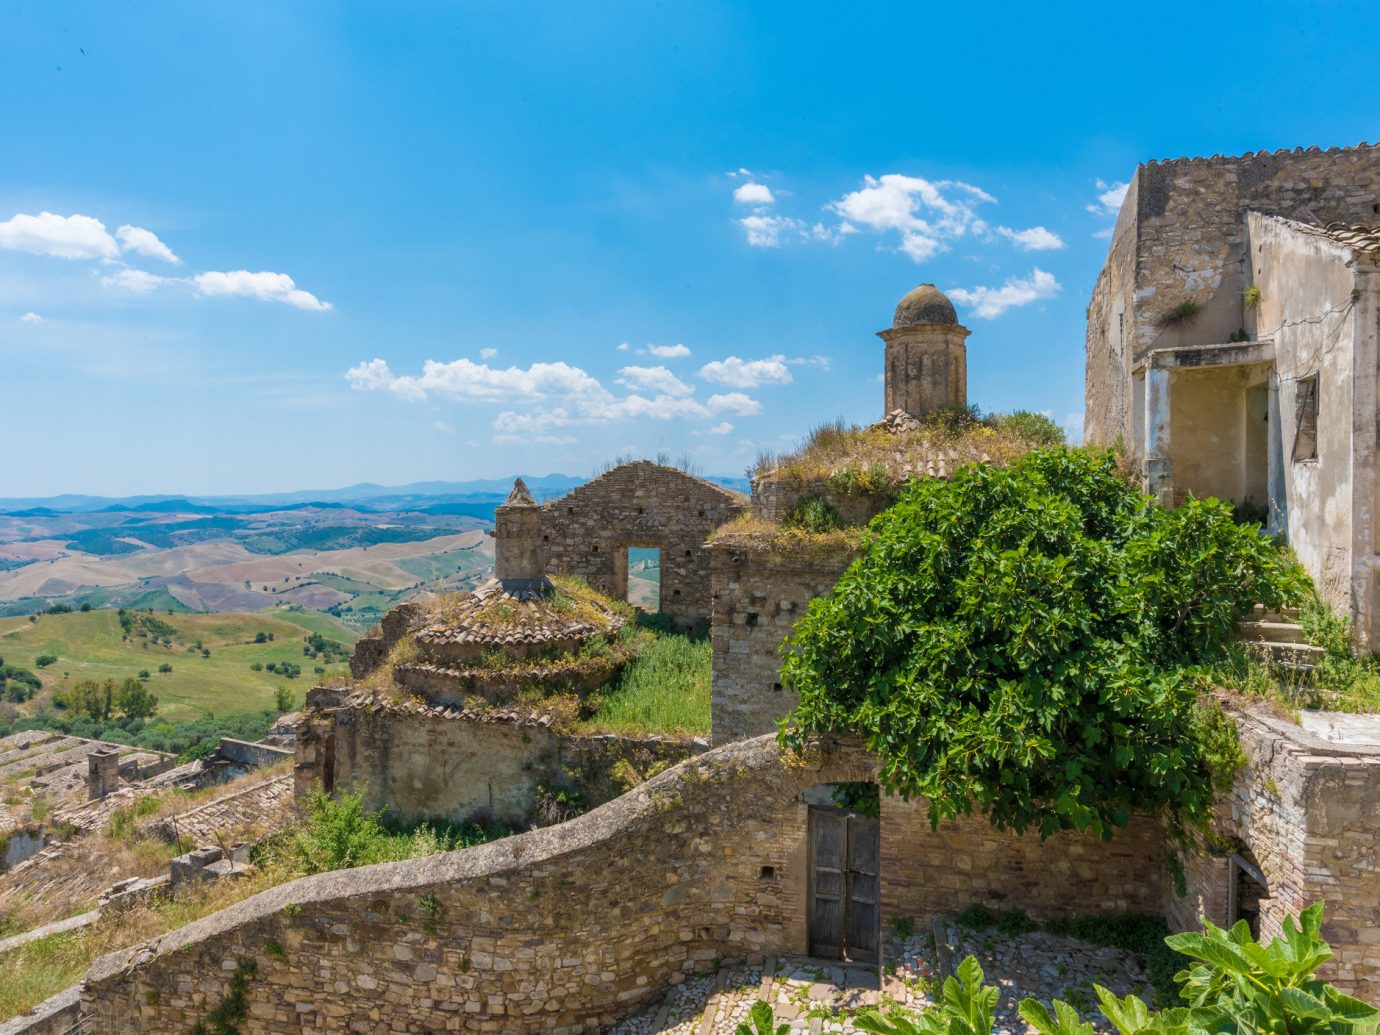 europe Italy Off-the-beaten Path Trip Ideas outdoor sky grass fortification historic site ancient history archaeological site Ruins wall stone Village history cloud tree mountain rock castle landscape middle ages tourism hillside